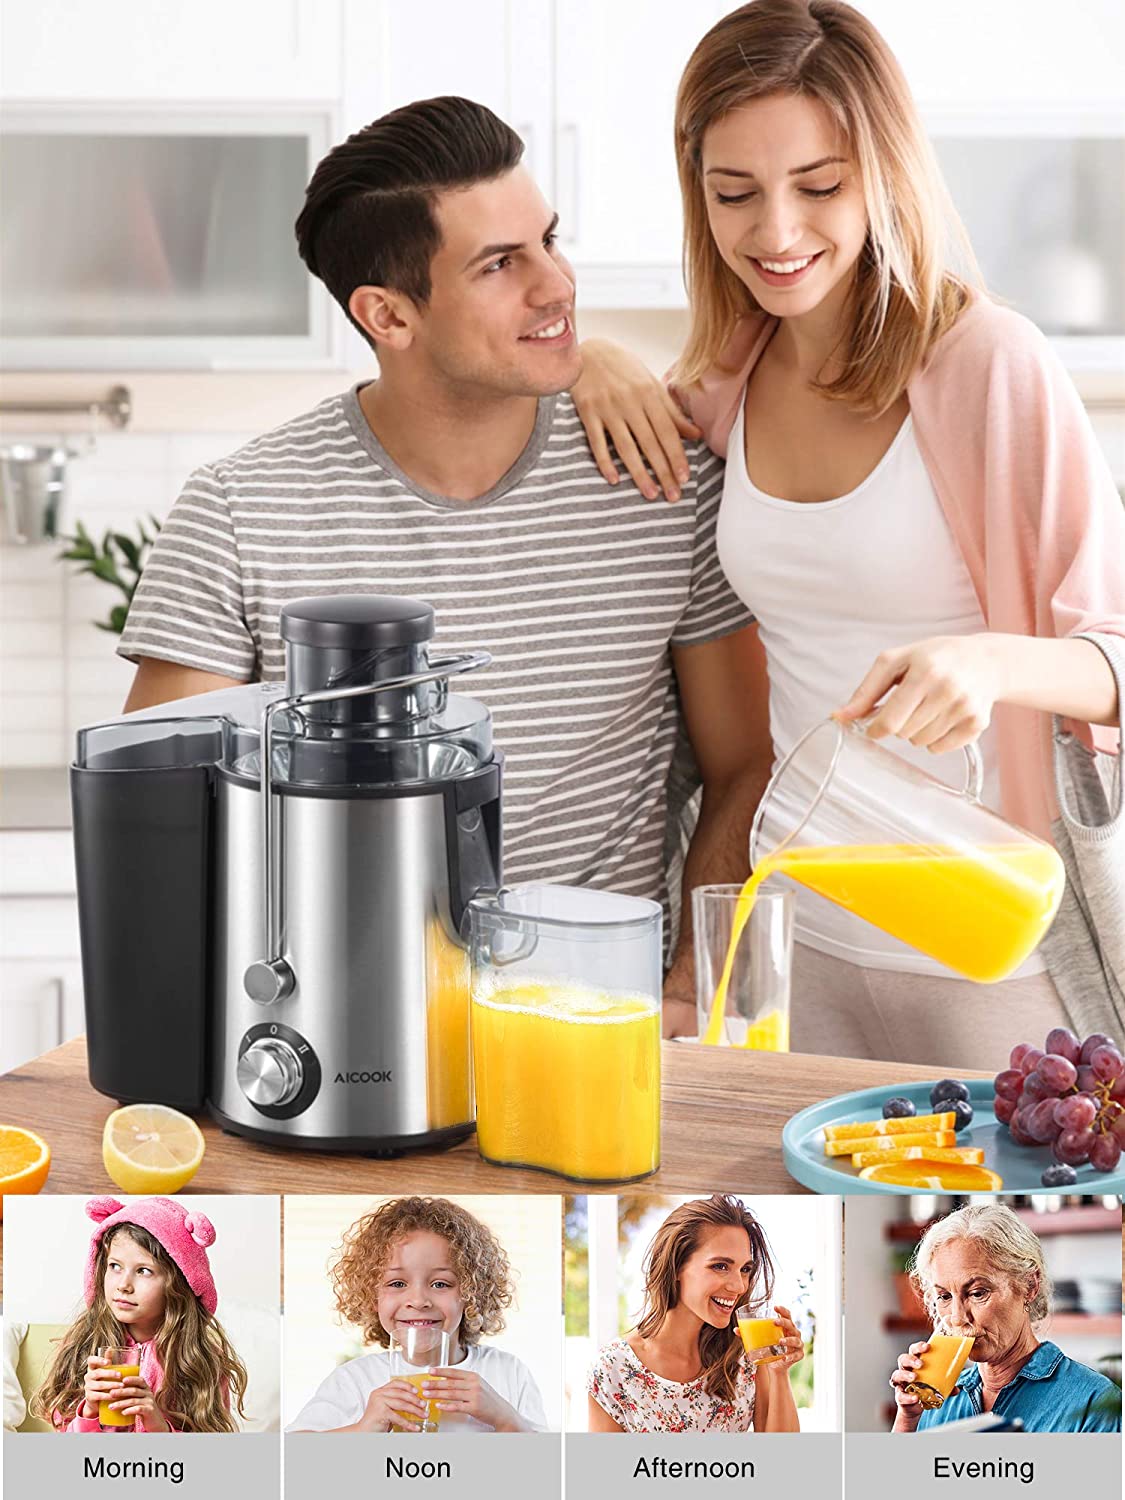 Aicook | Centrifugal Juicer Machine, Juice Extractor, 3''Wide Mouth Juicer with 2 Speeds for Fruits and Vegs, Anti-drip, Stainless Steel & BPA Free